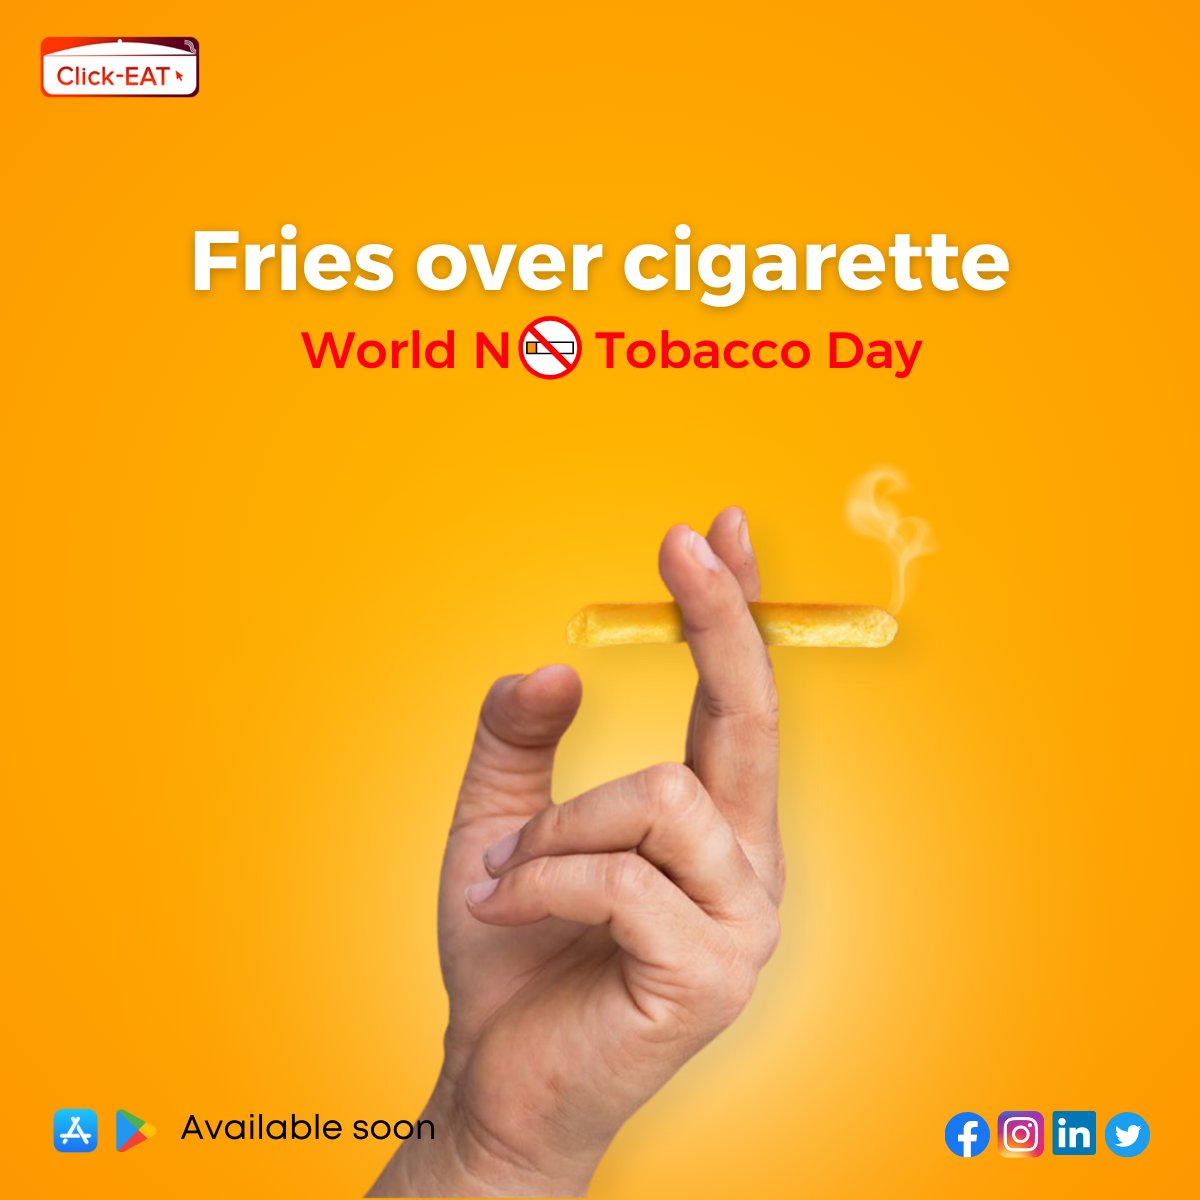 Choose your addiction wisely: Lift your fries, not cigarettes this World No Tobacco Day.  
click-eat.co.uk

#QuitSmoking #WorldNoTobaccoDay #bookrestarauant #order #onlinebooking #restaurantmanagement #joinclickeat #clickeat #dinewithclickeat #adidasIndia